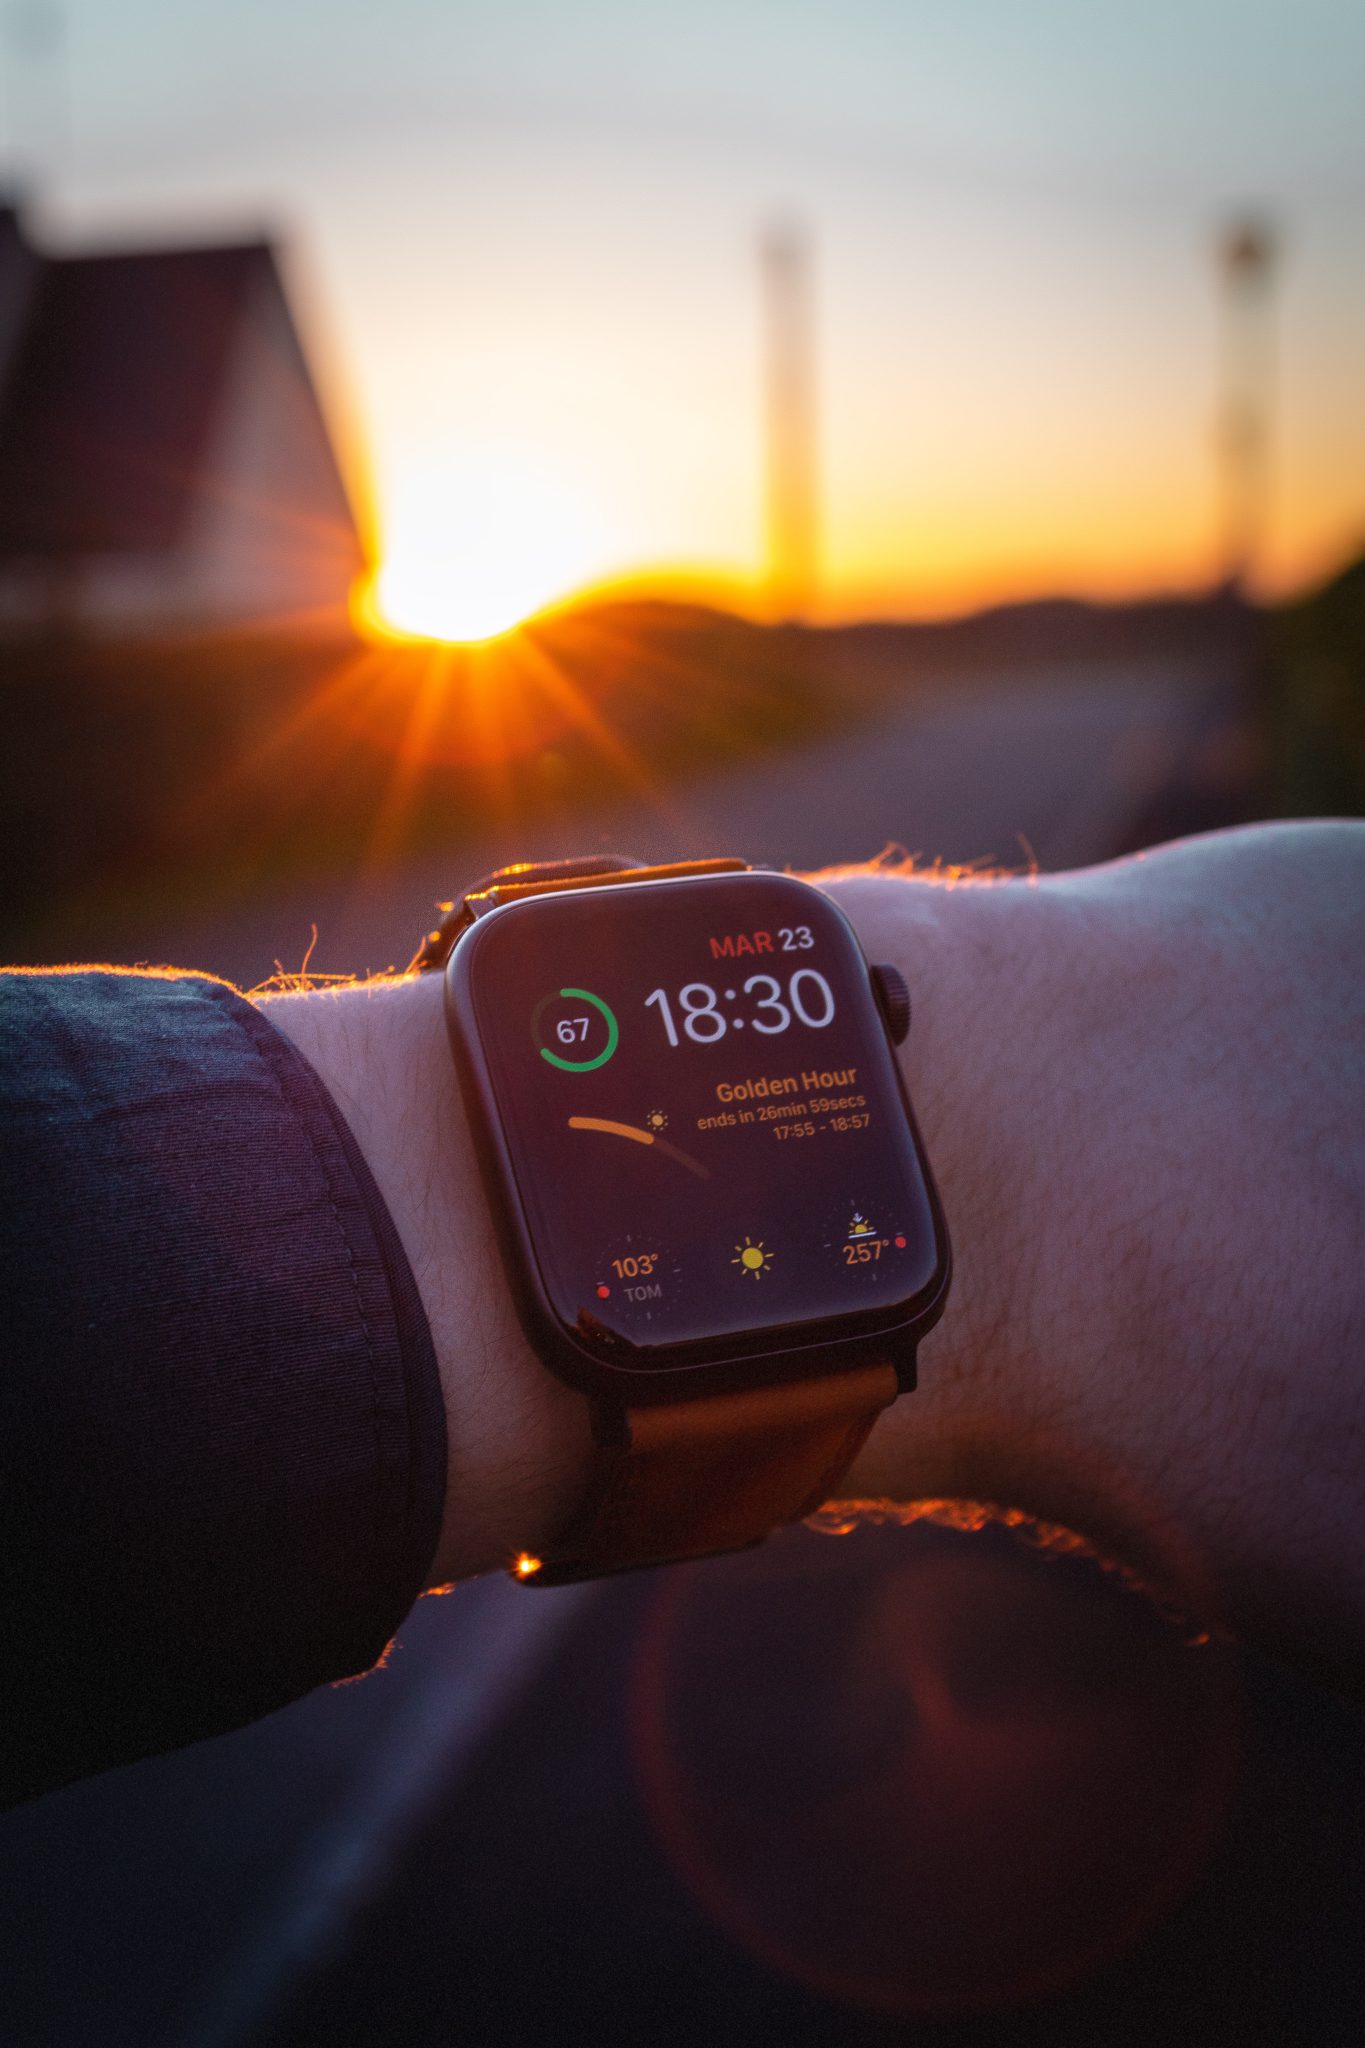 Apple Watch in front of a sunset